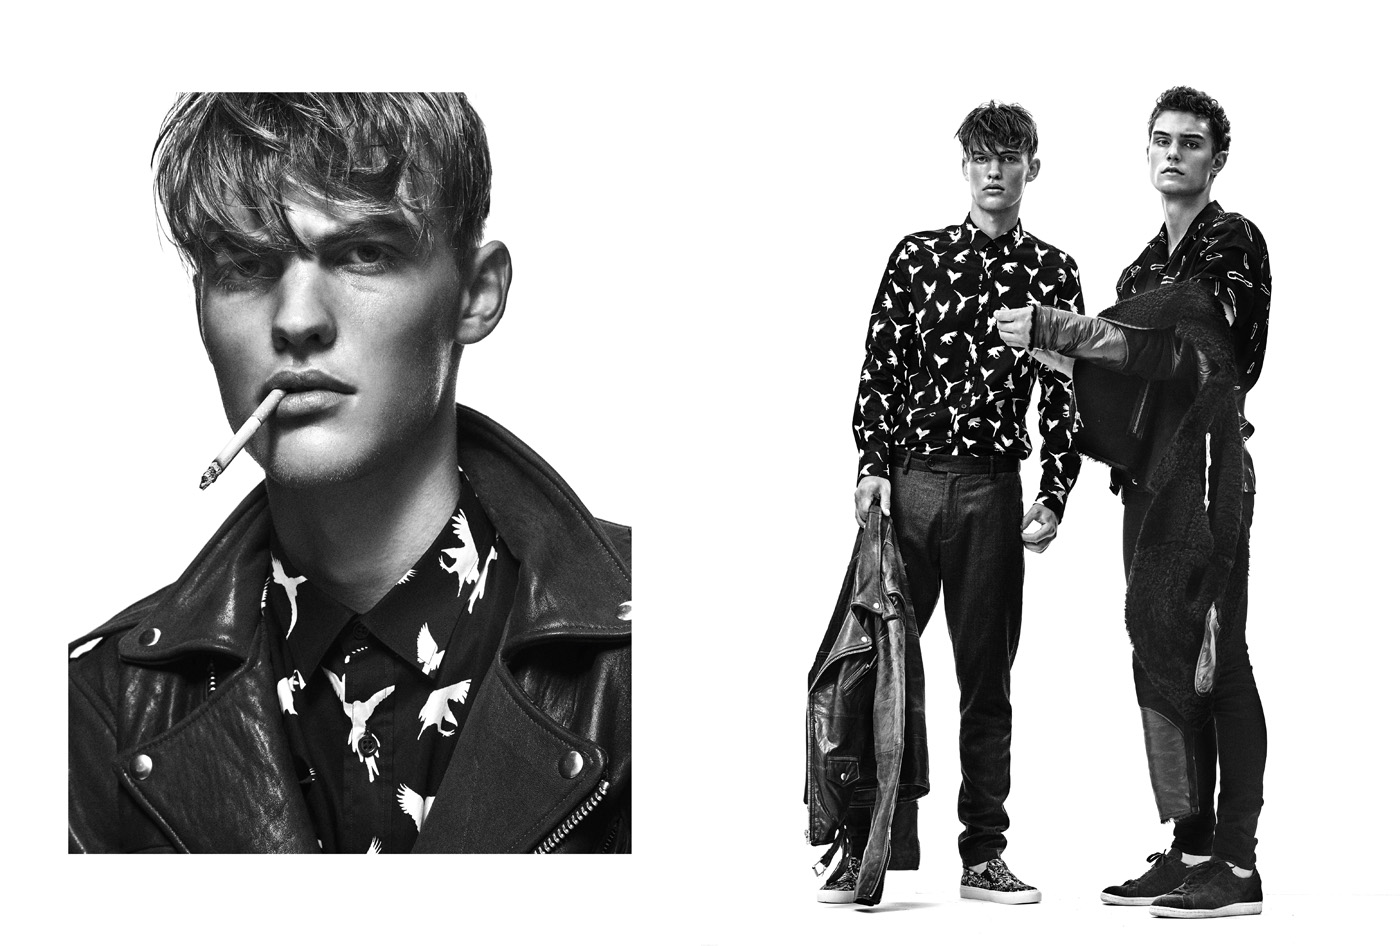 CHASSEUR WEBDITORIAL : BOYS BY MICHAEL JEPSEN - Chasseur Magazine